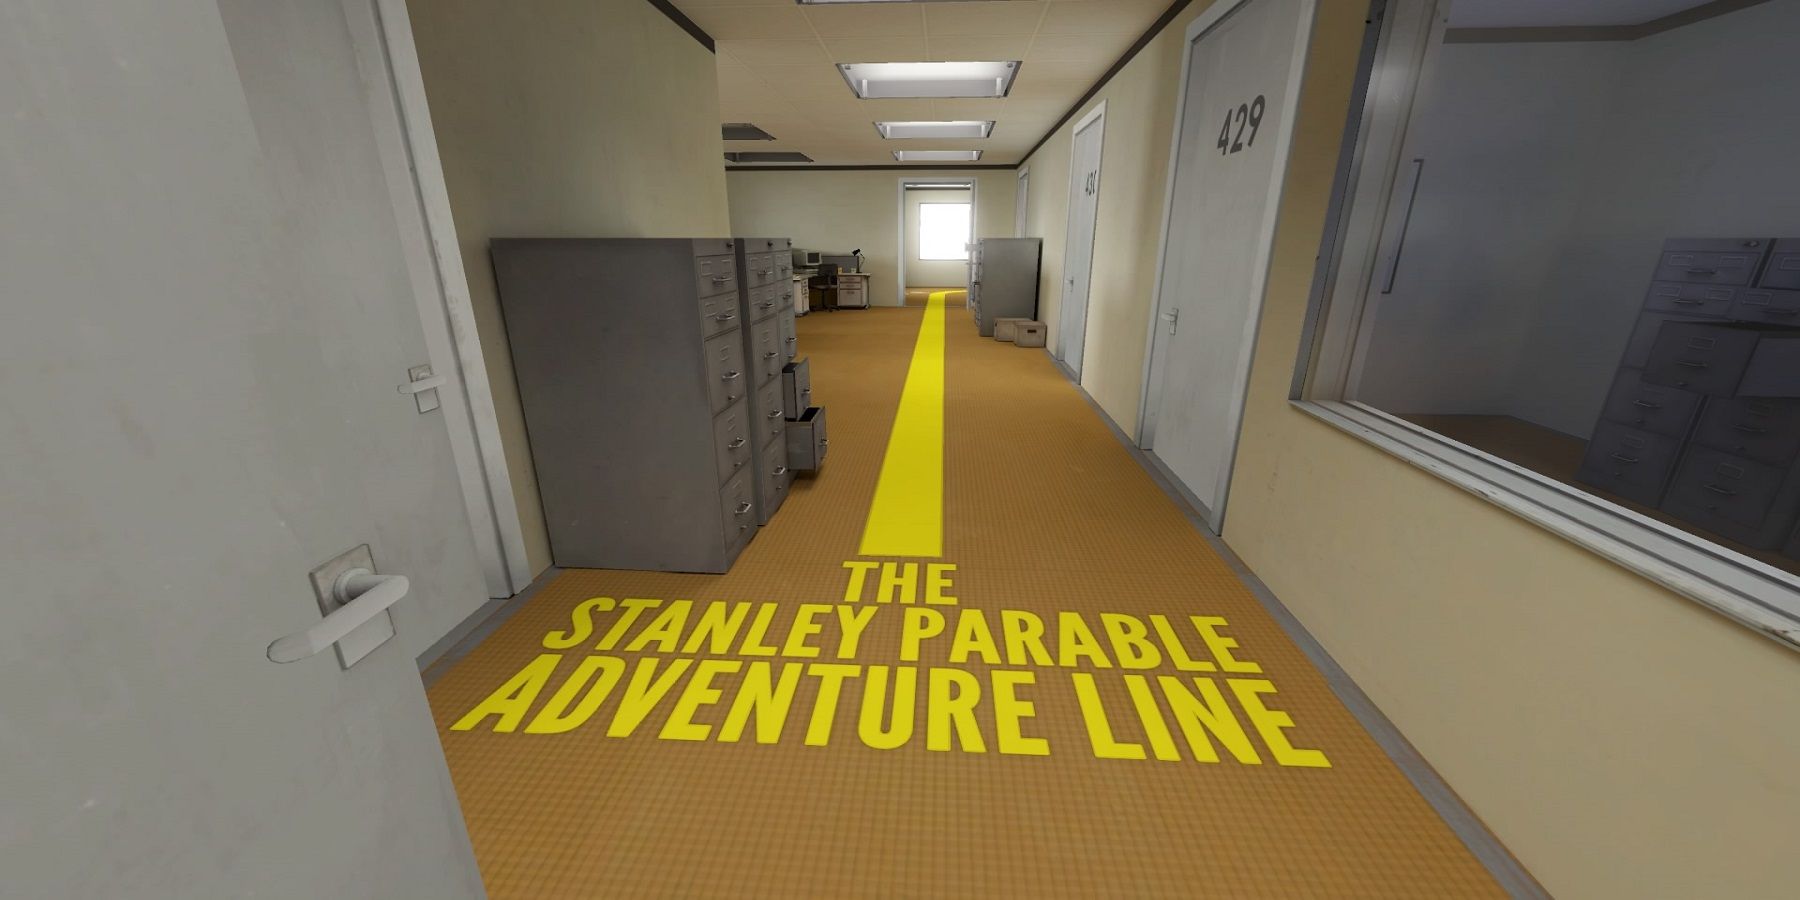 The Stanley Parable - Ultra Deluxe Adventure